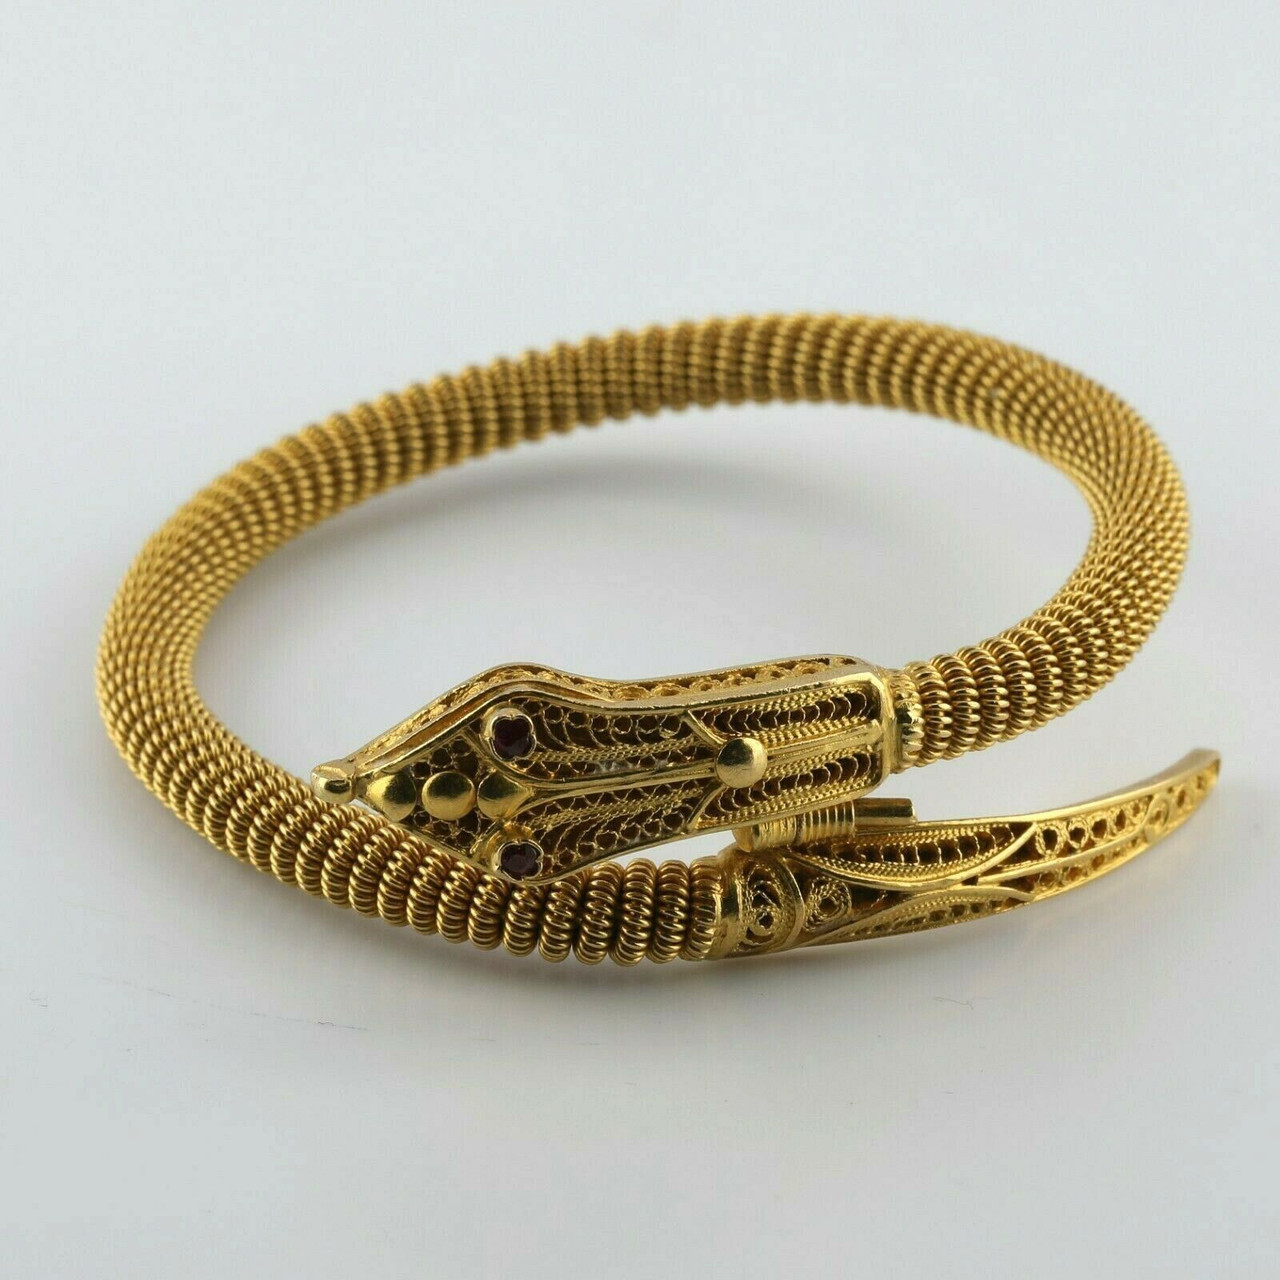 Snake Bracelet Super Hand Made 21K Yellow Gold Filigree Head and Ruby Eyes  - Colonial Trading Company